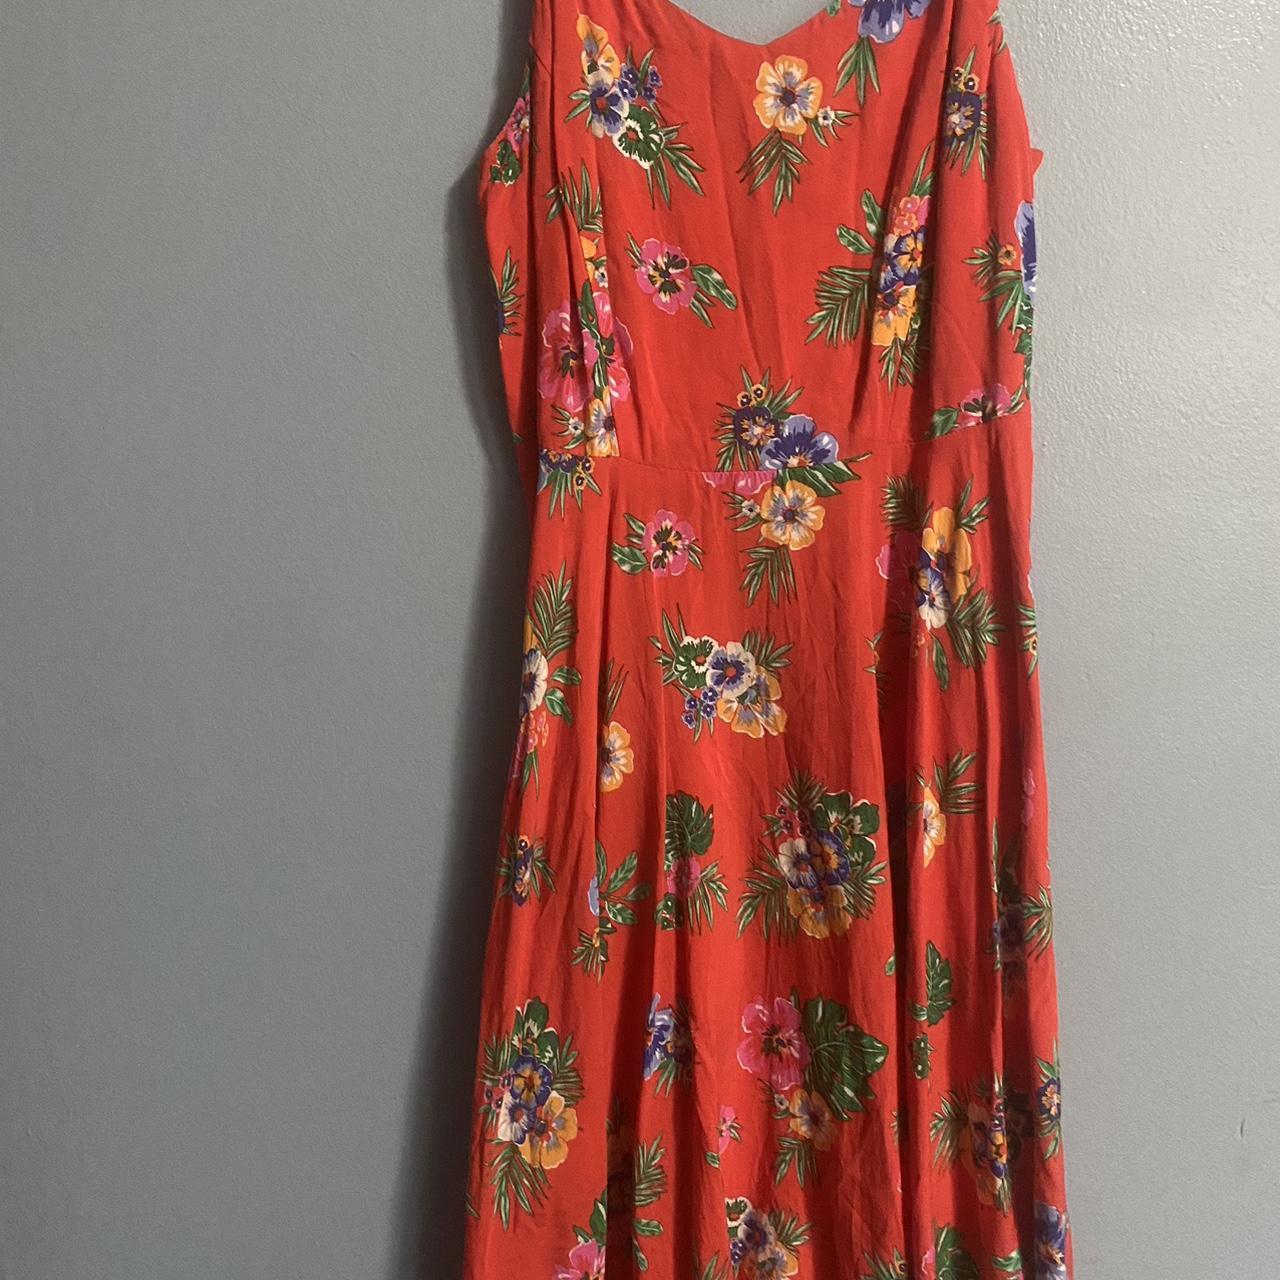 Red tropical pattern dress old navy Fits S/XS, M is... - Depop